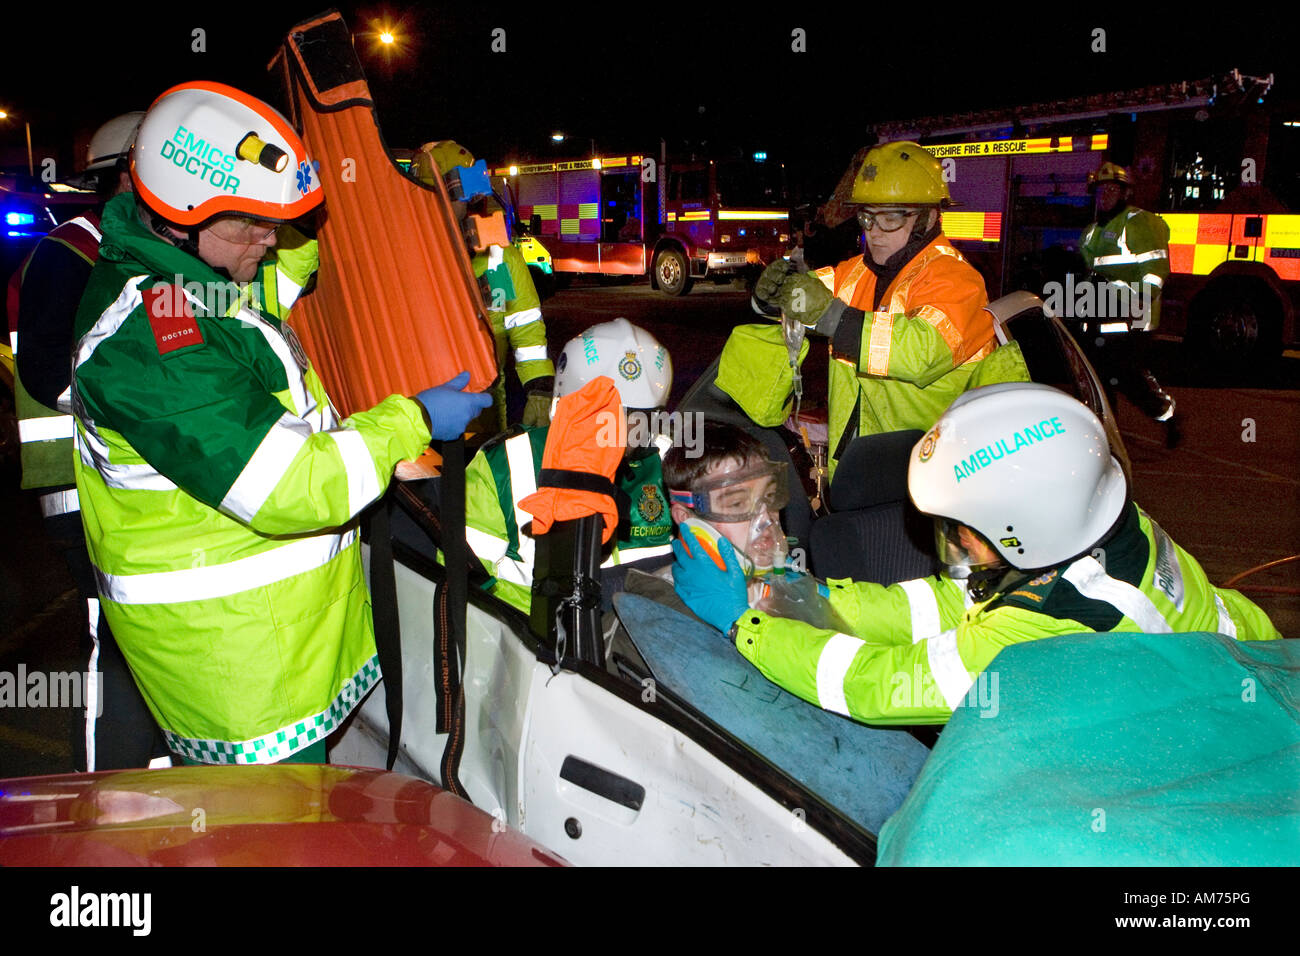 Road Traffic Accident Simulation in Chesterfield Derbyshire involving Police, Paramedics, Fire, Services and volunteer victims Stock Photo